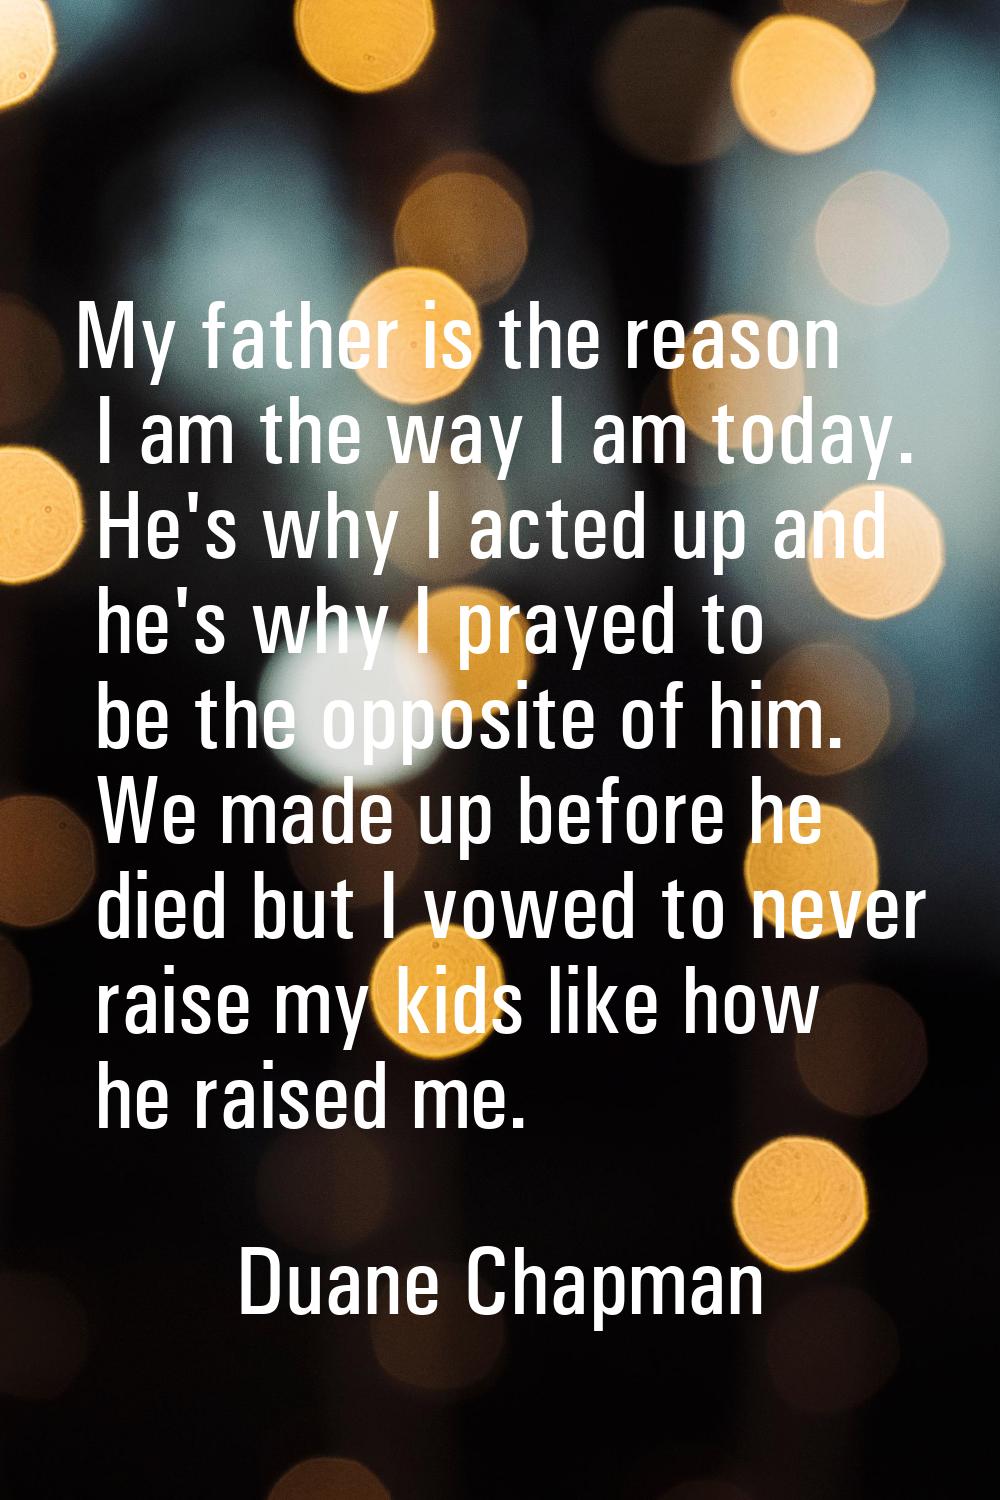 My father is the reason I am the way I am today. He's why I acted up and he's why I prayed to be th